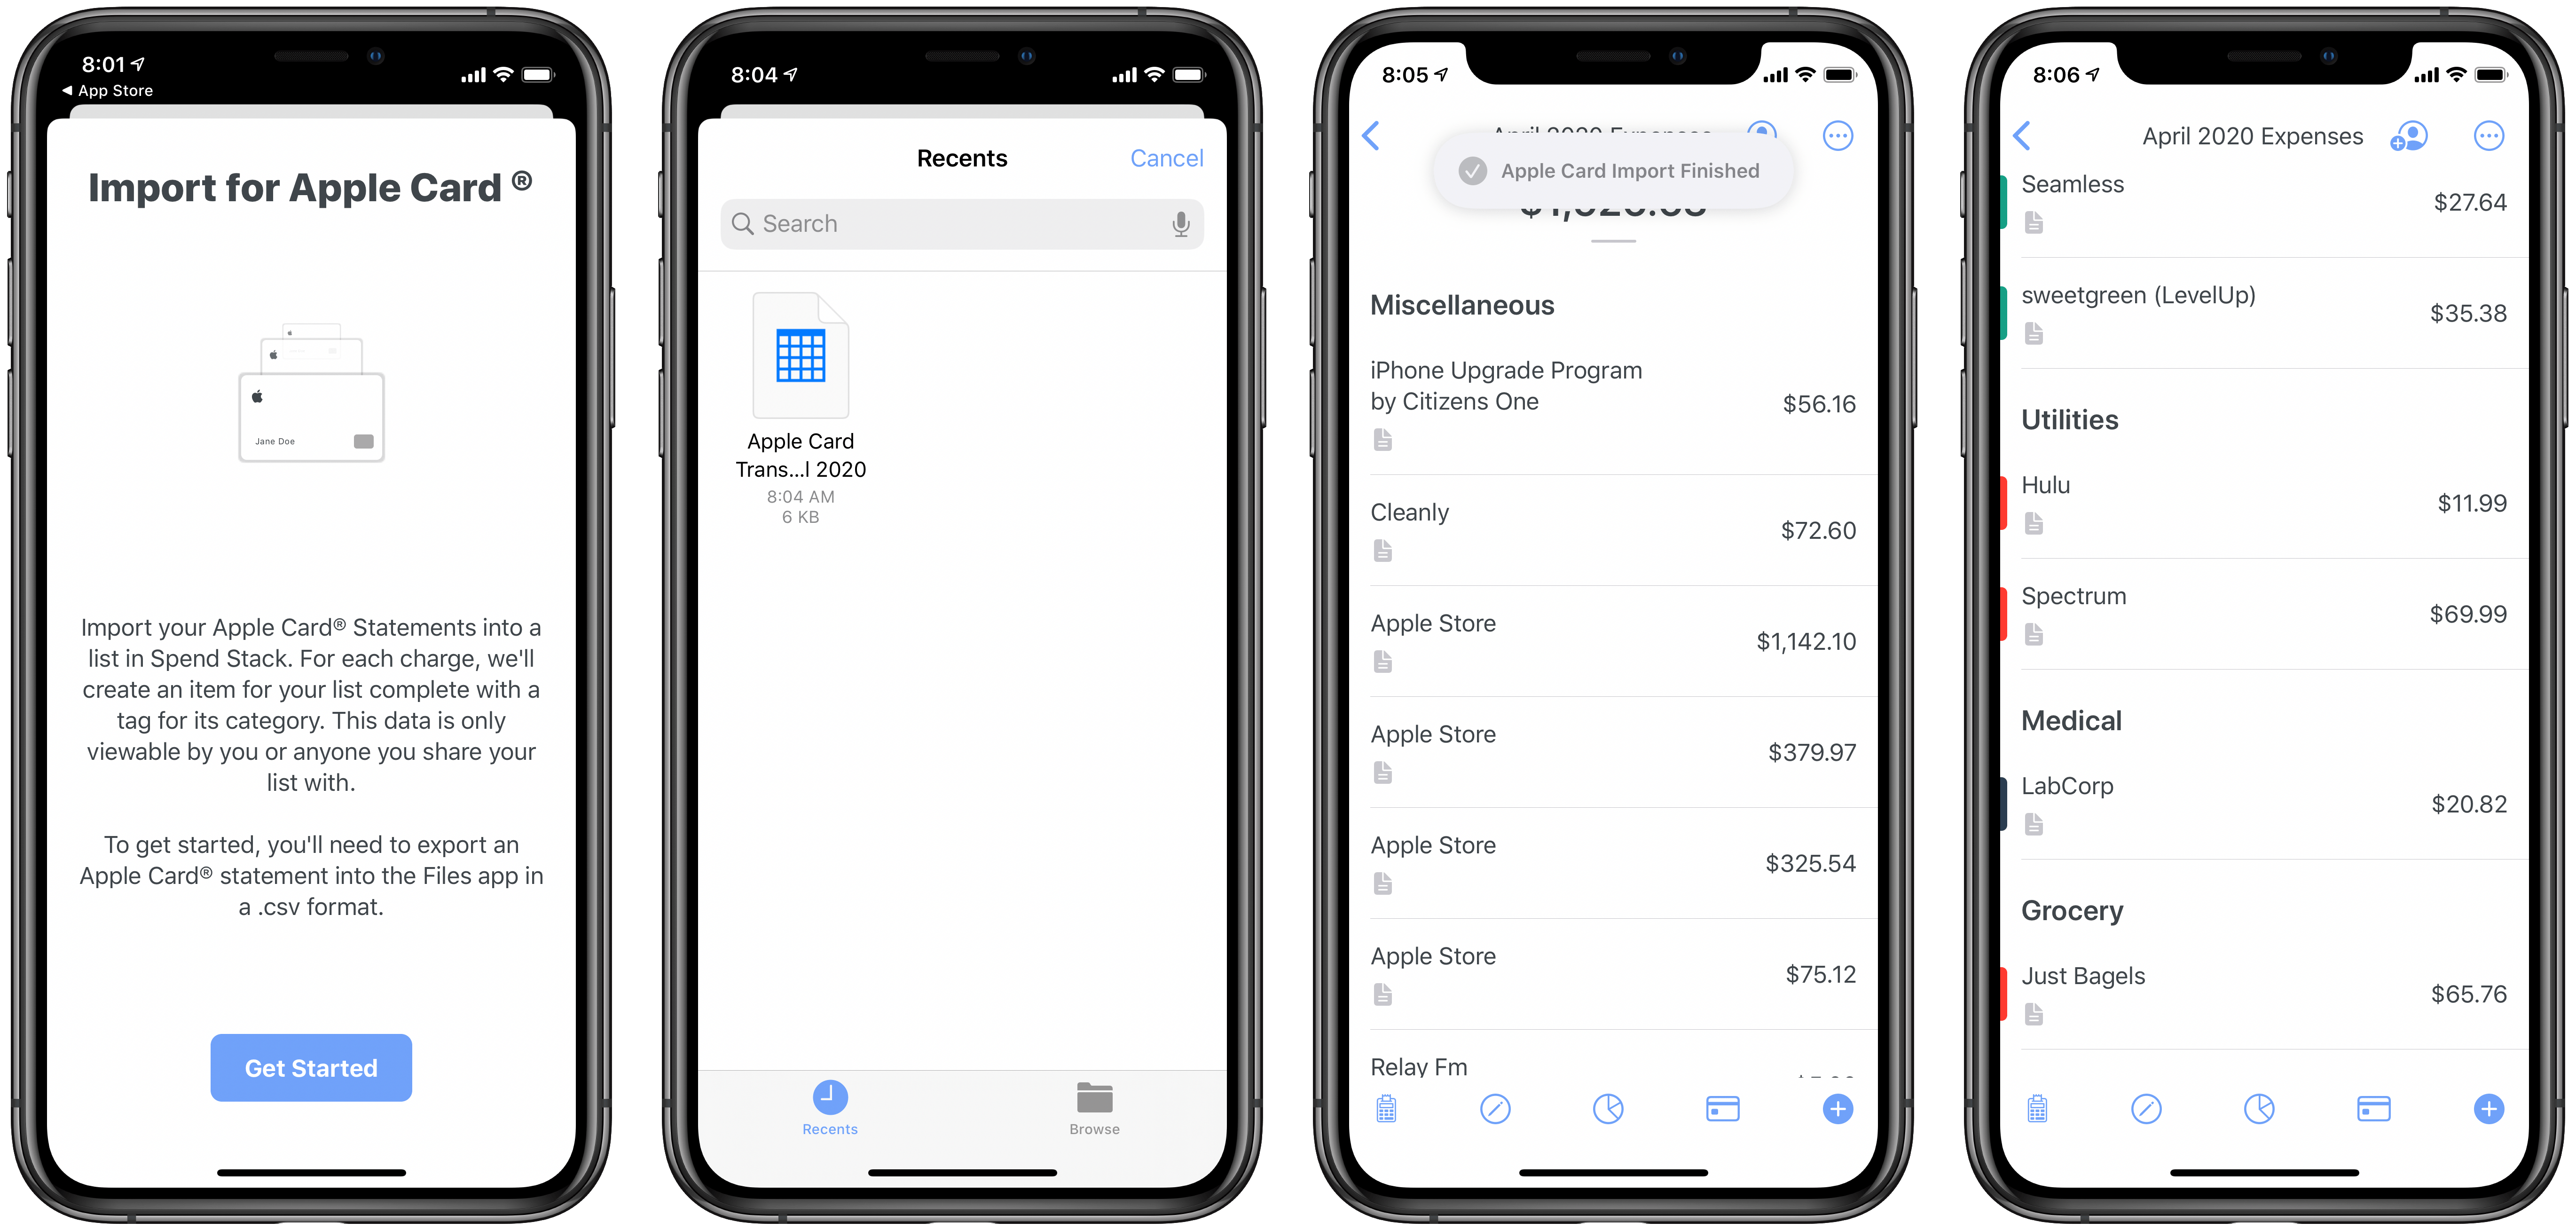 Importing an Apple Card statement into Spend Stack.